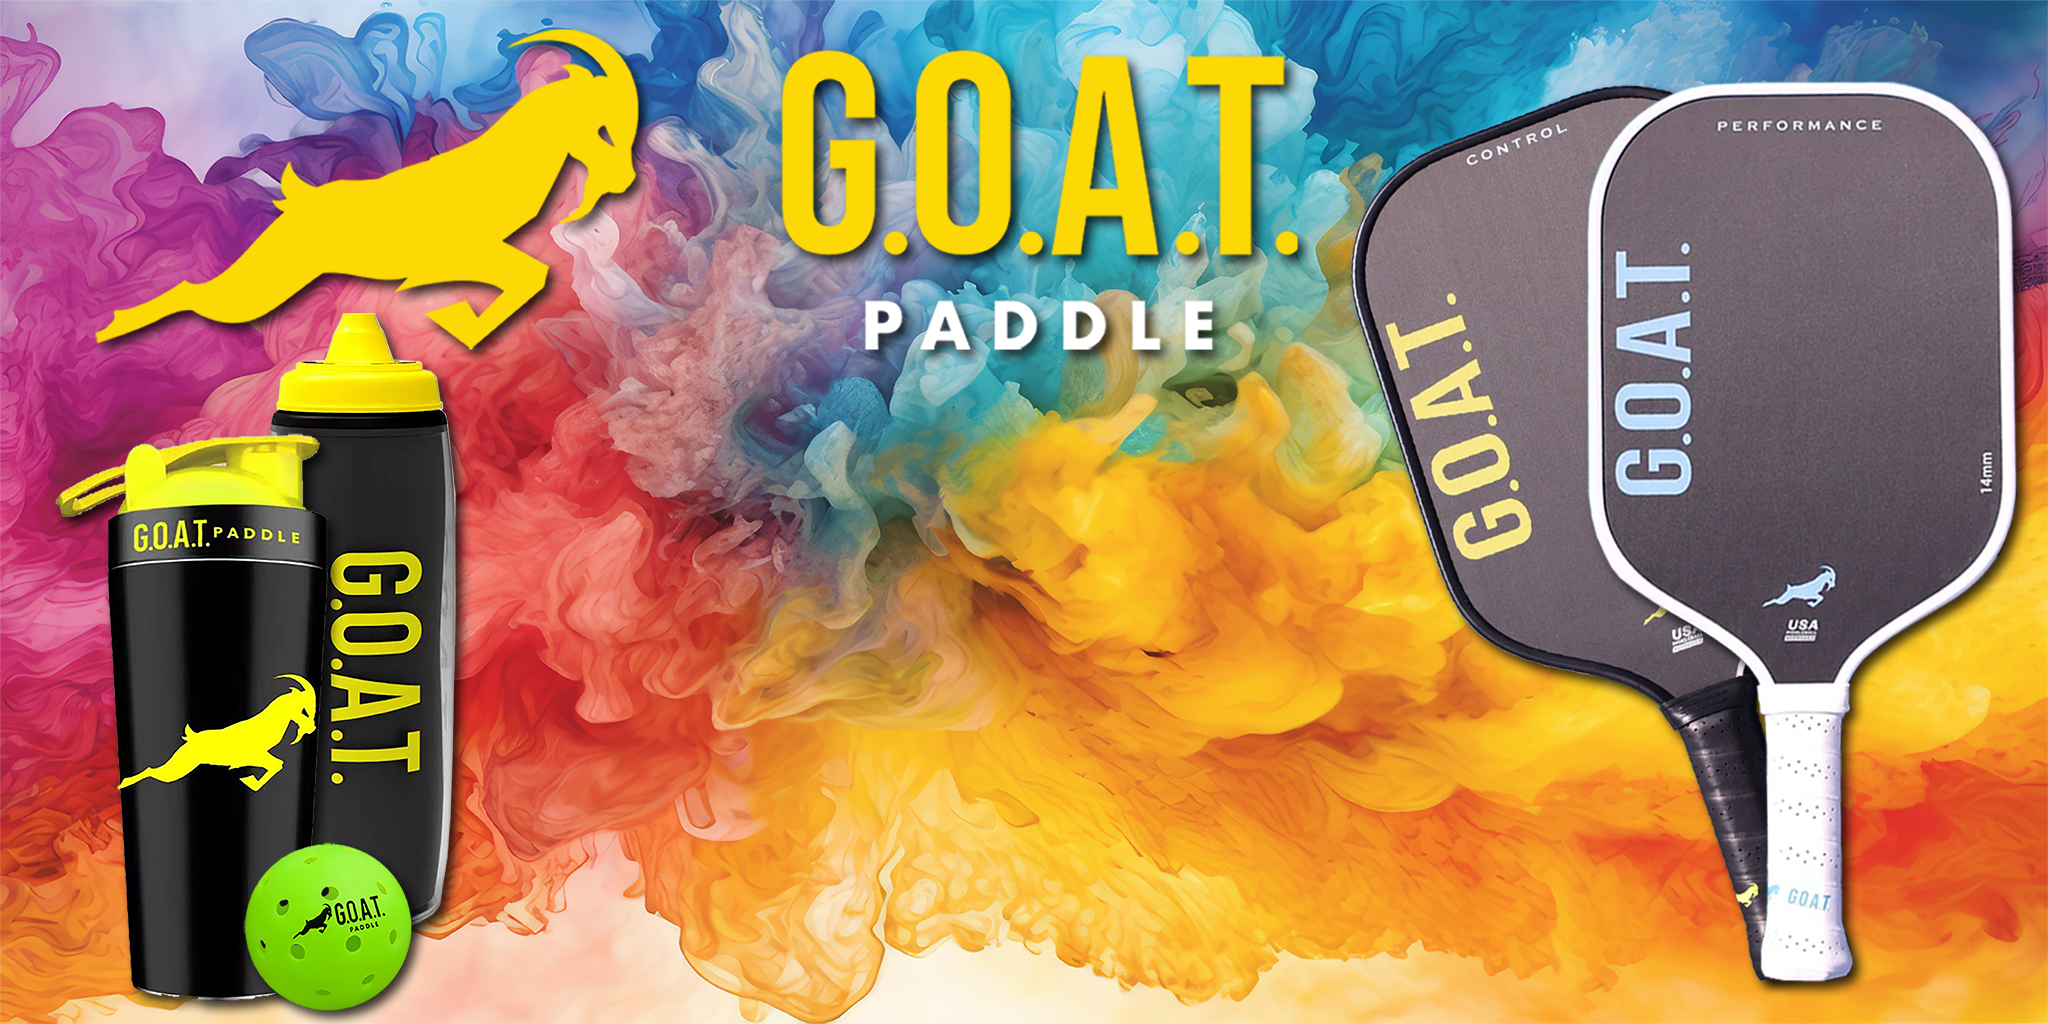 GOAT Best Pickleball Paddles, Gear, and Accessories.  Style, Function, Performance, Control, Power.  